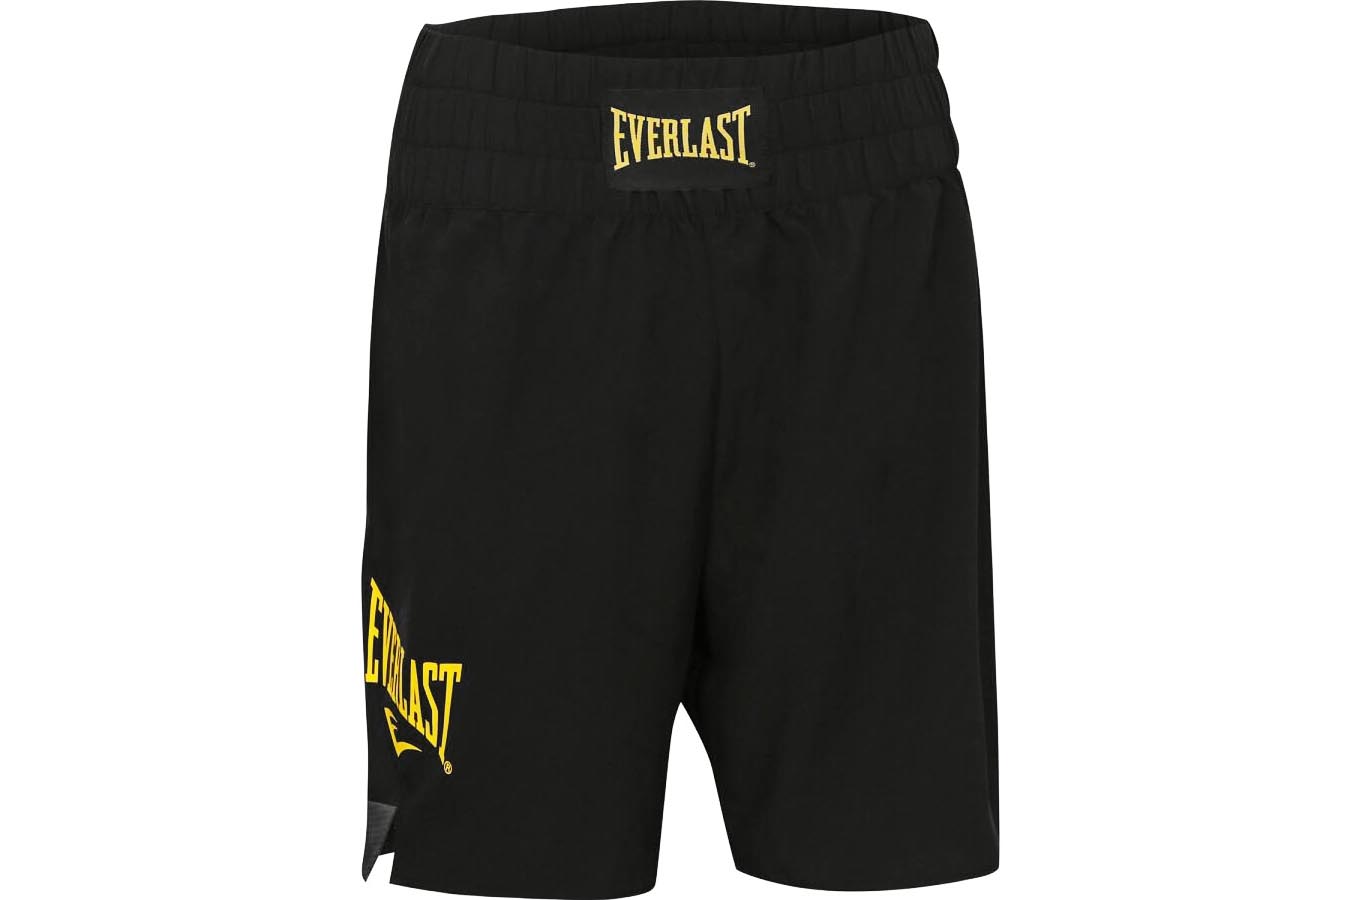 Everlast Pro Boxing Shorts – The Fight Factory